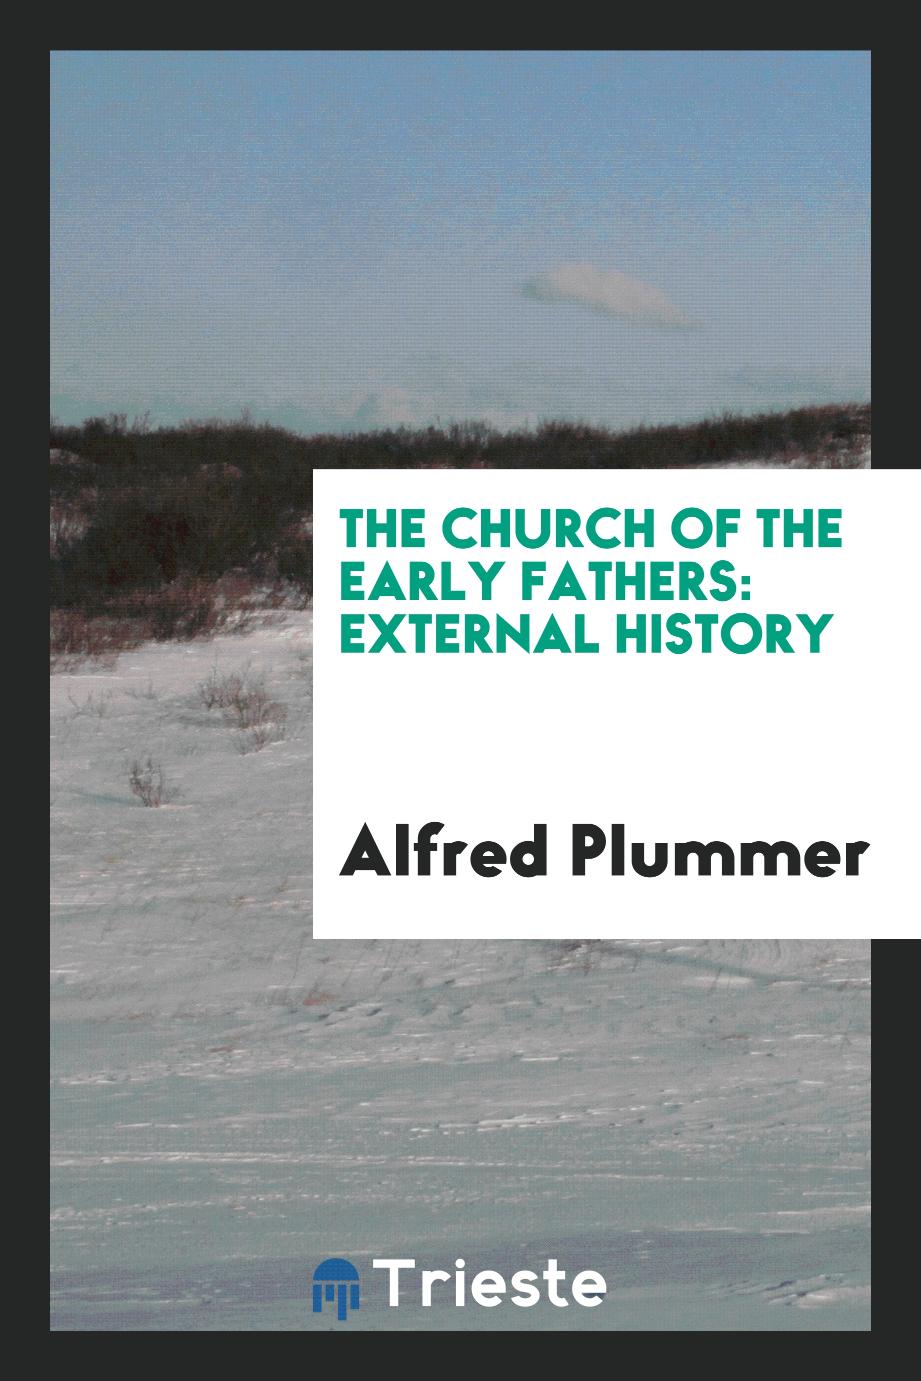 The church of the early fathers: external history